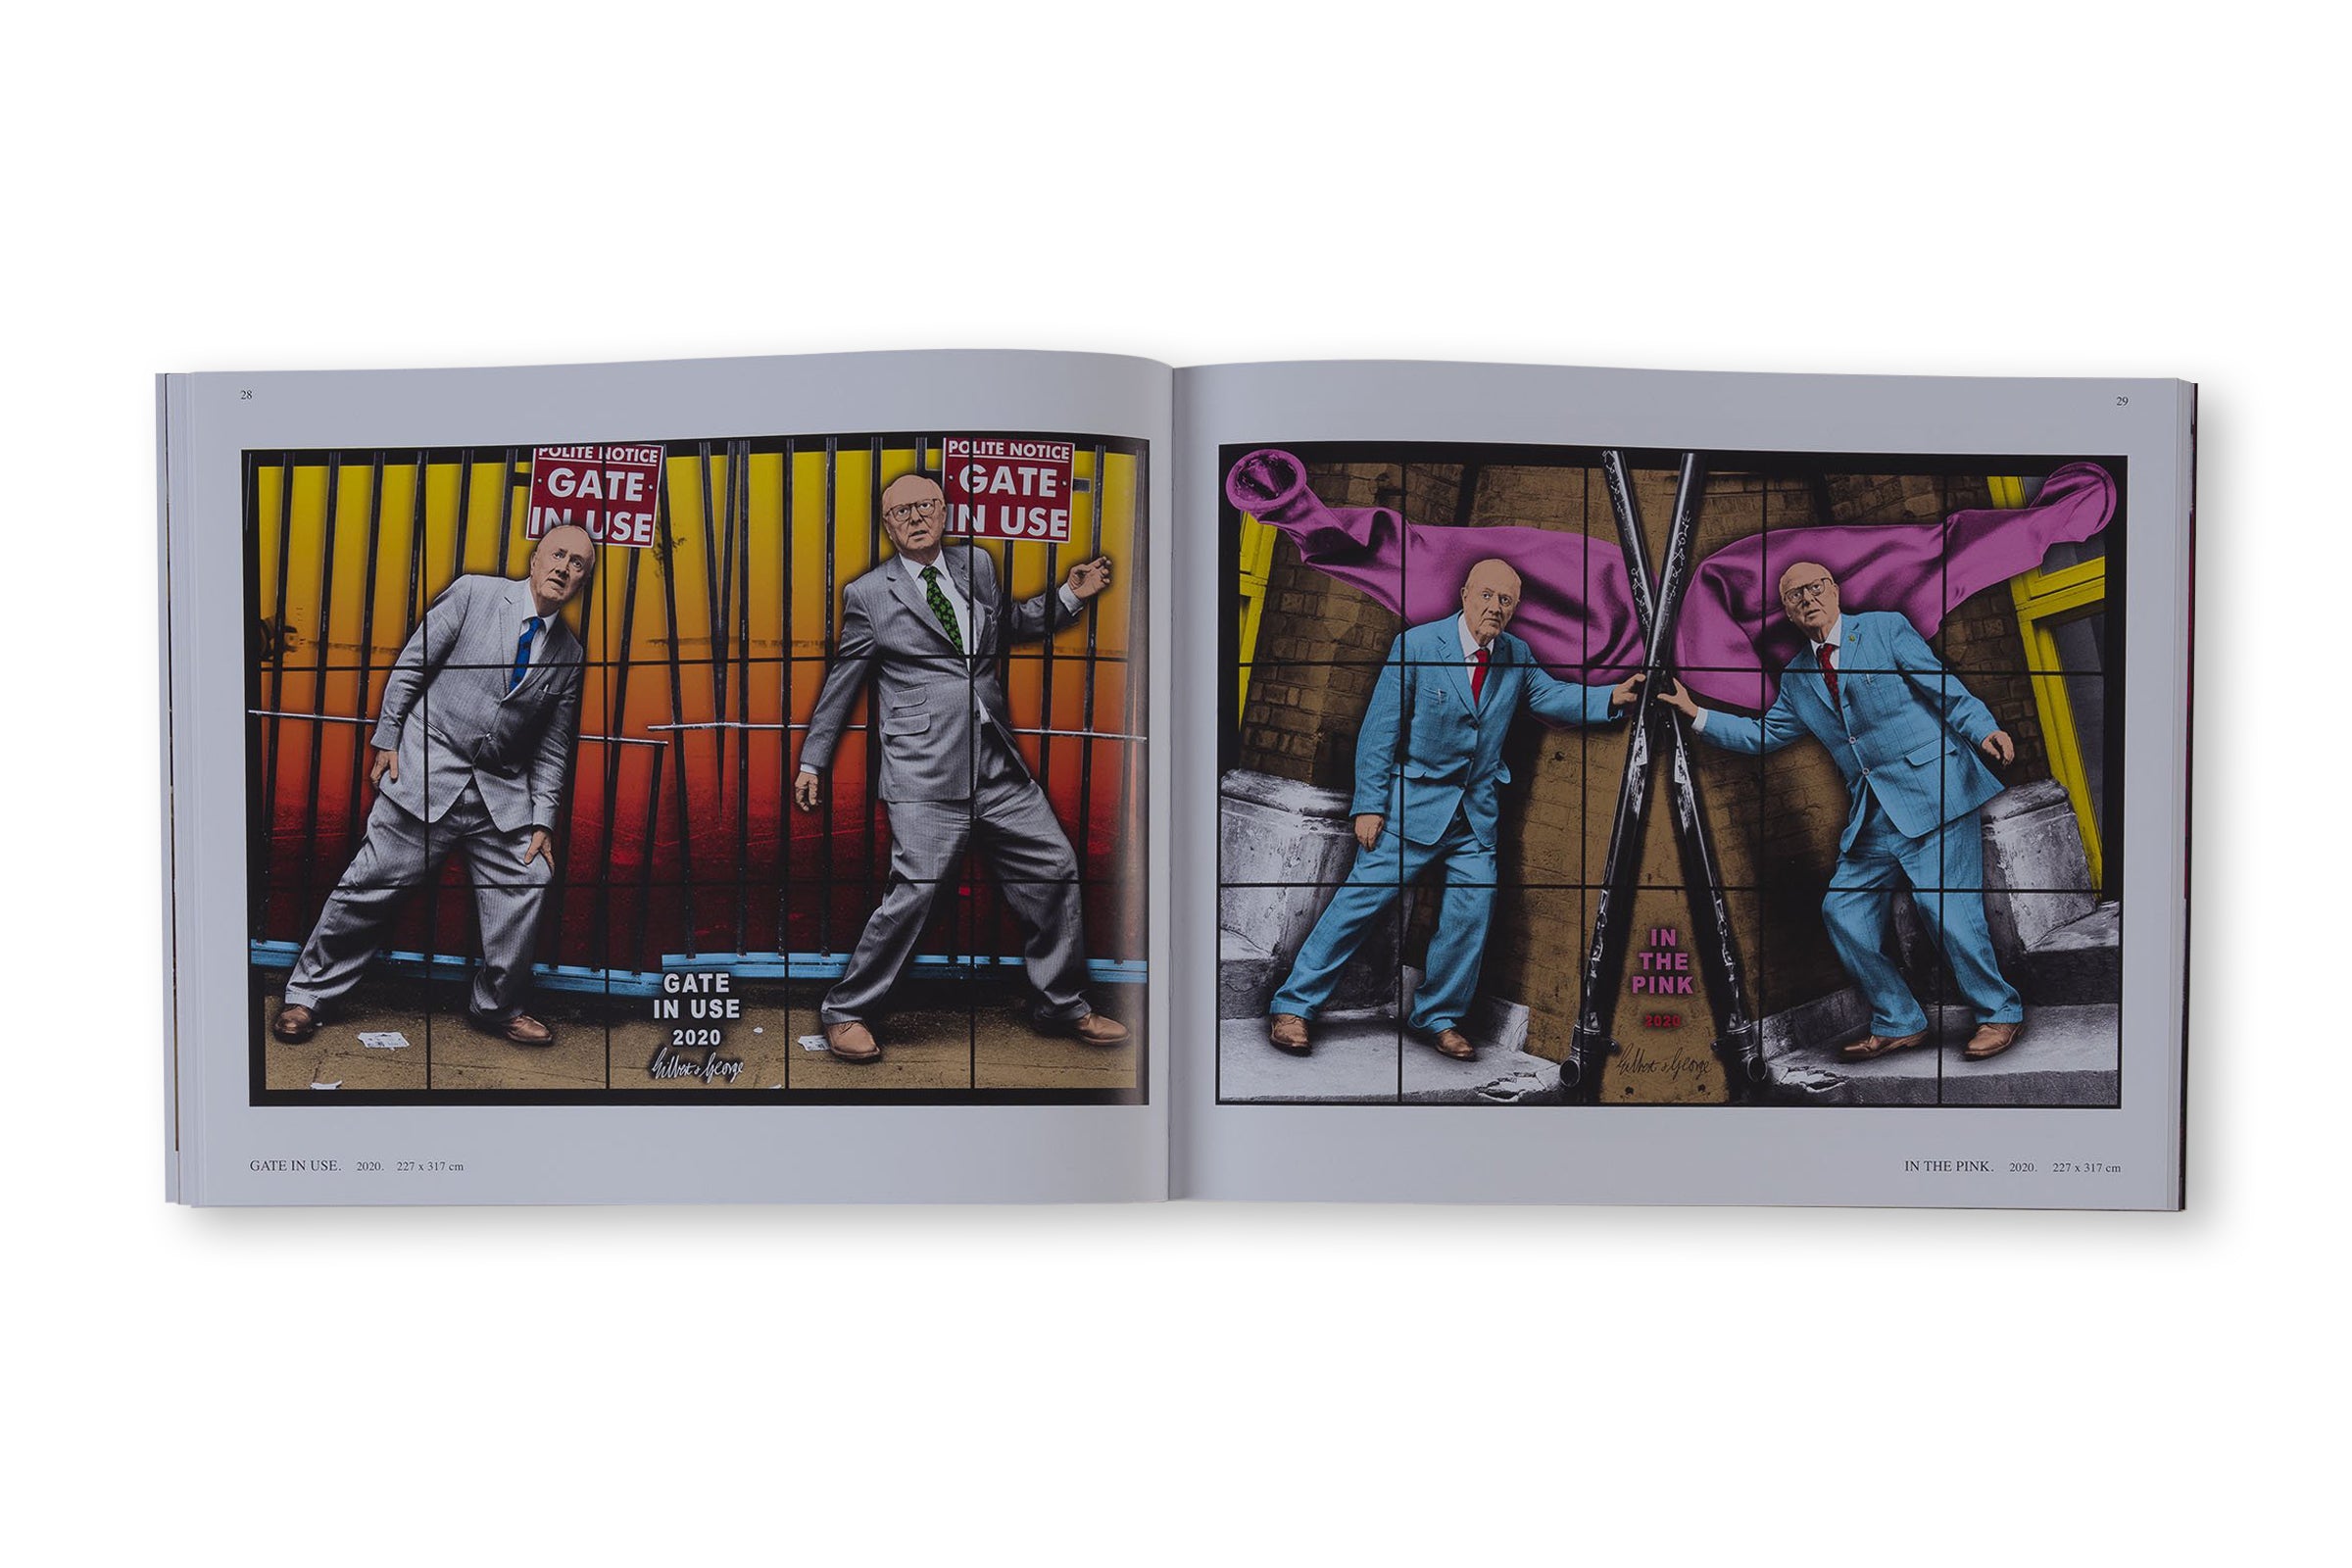 NEW NORMAL PICTURES by Gilbert and George